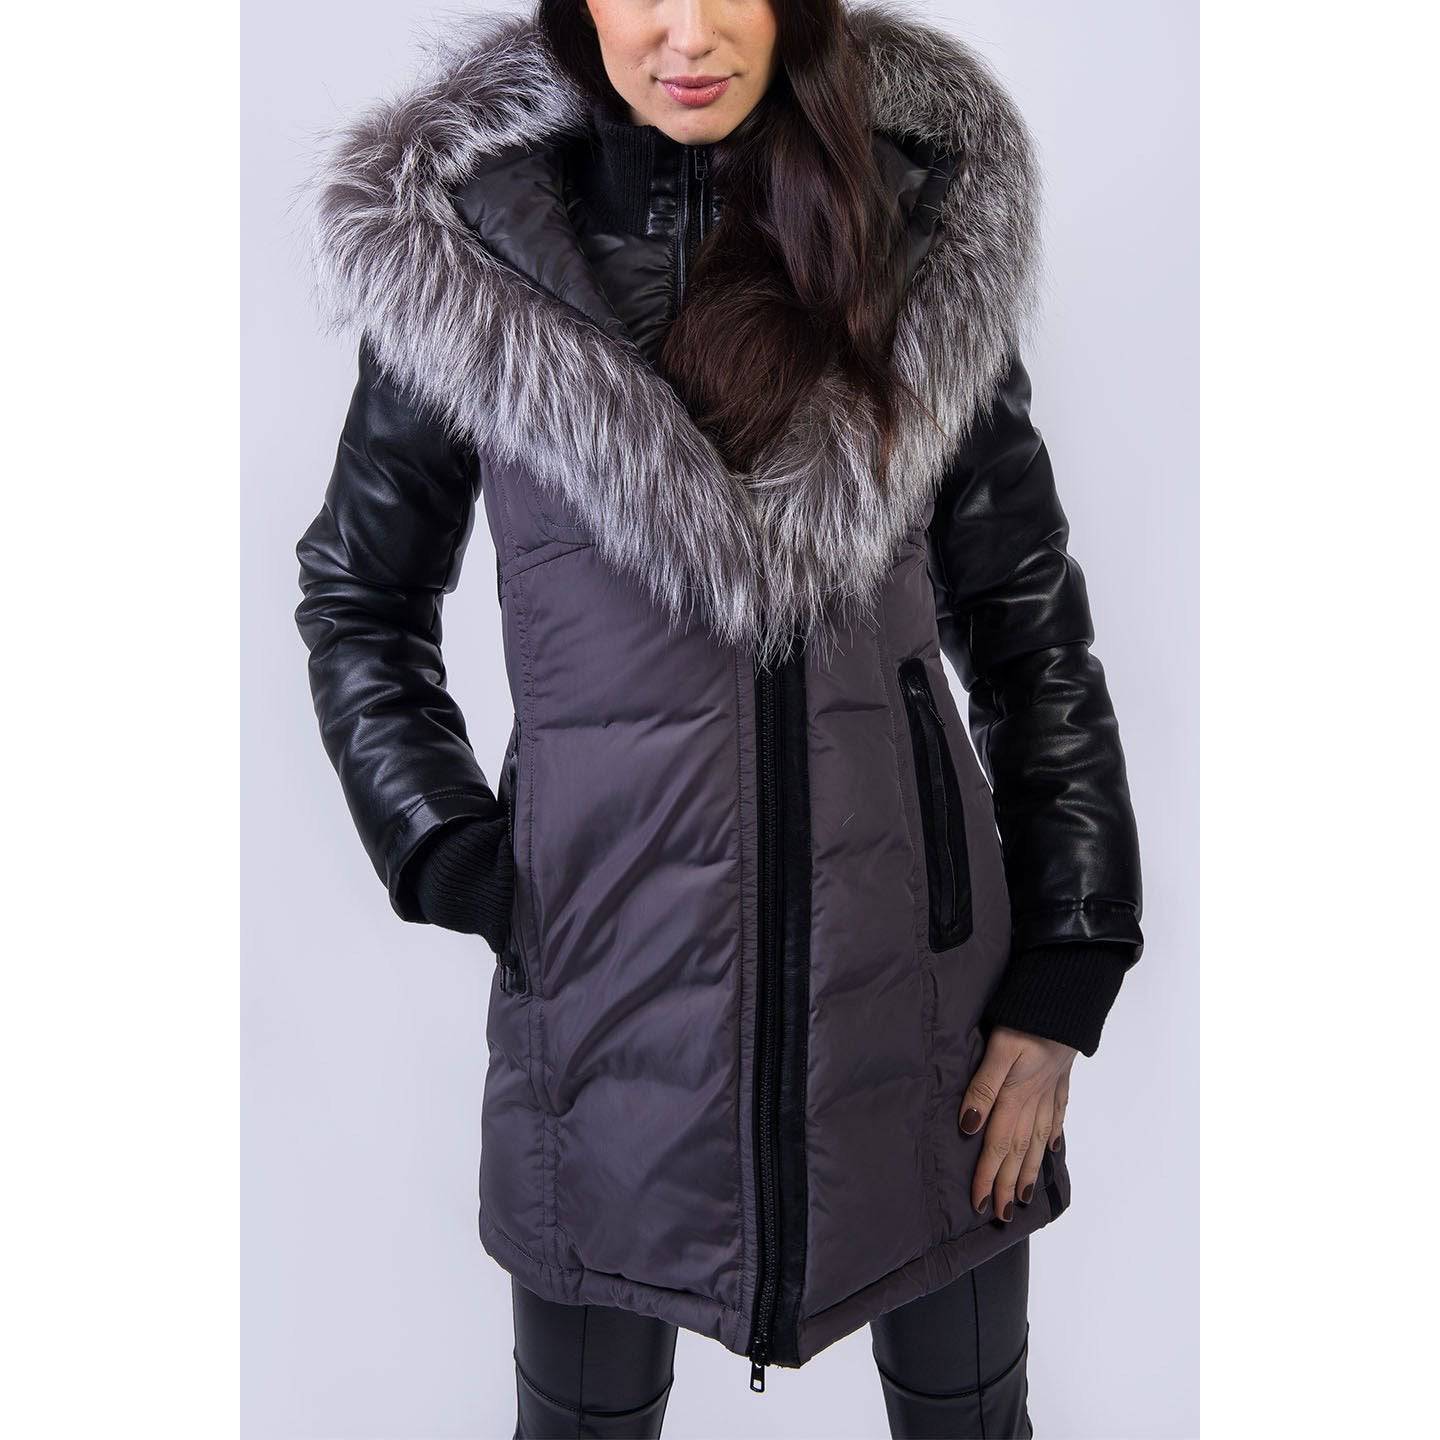 TOWMY BY SNOWIMAGE Down Coat with Natural Fur - Zooloo Leather